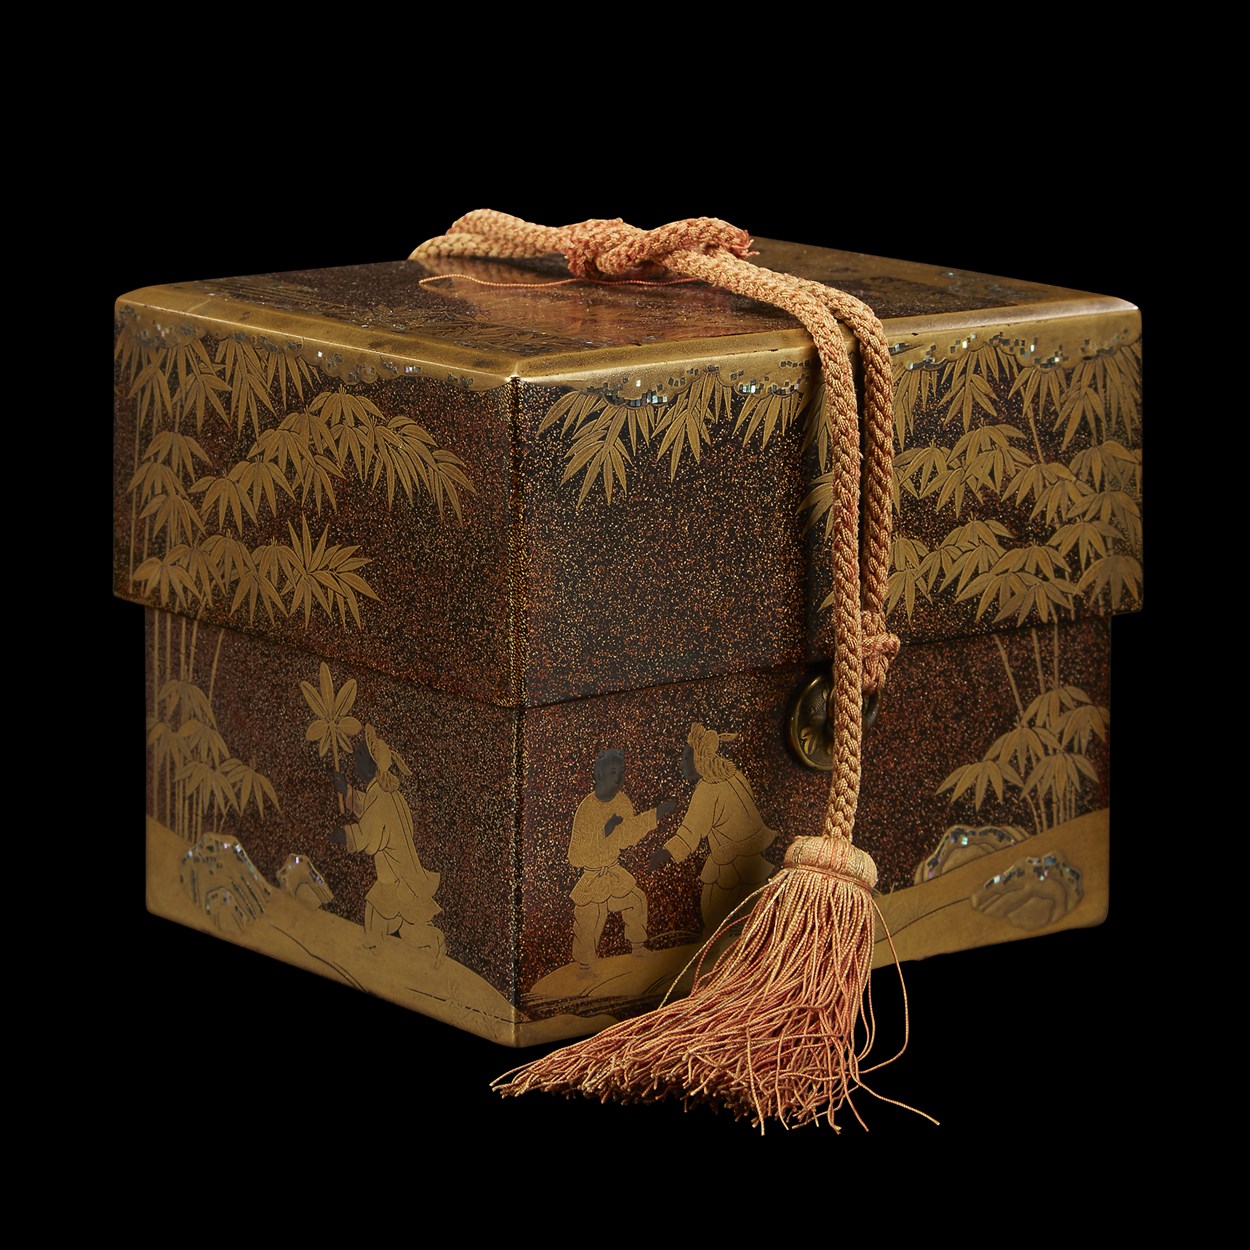 Lot 43 - A Japanese lacquer box and cover, Edo period